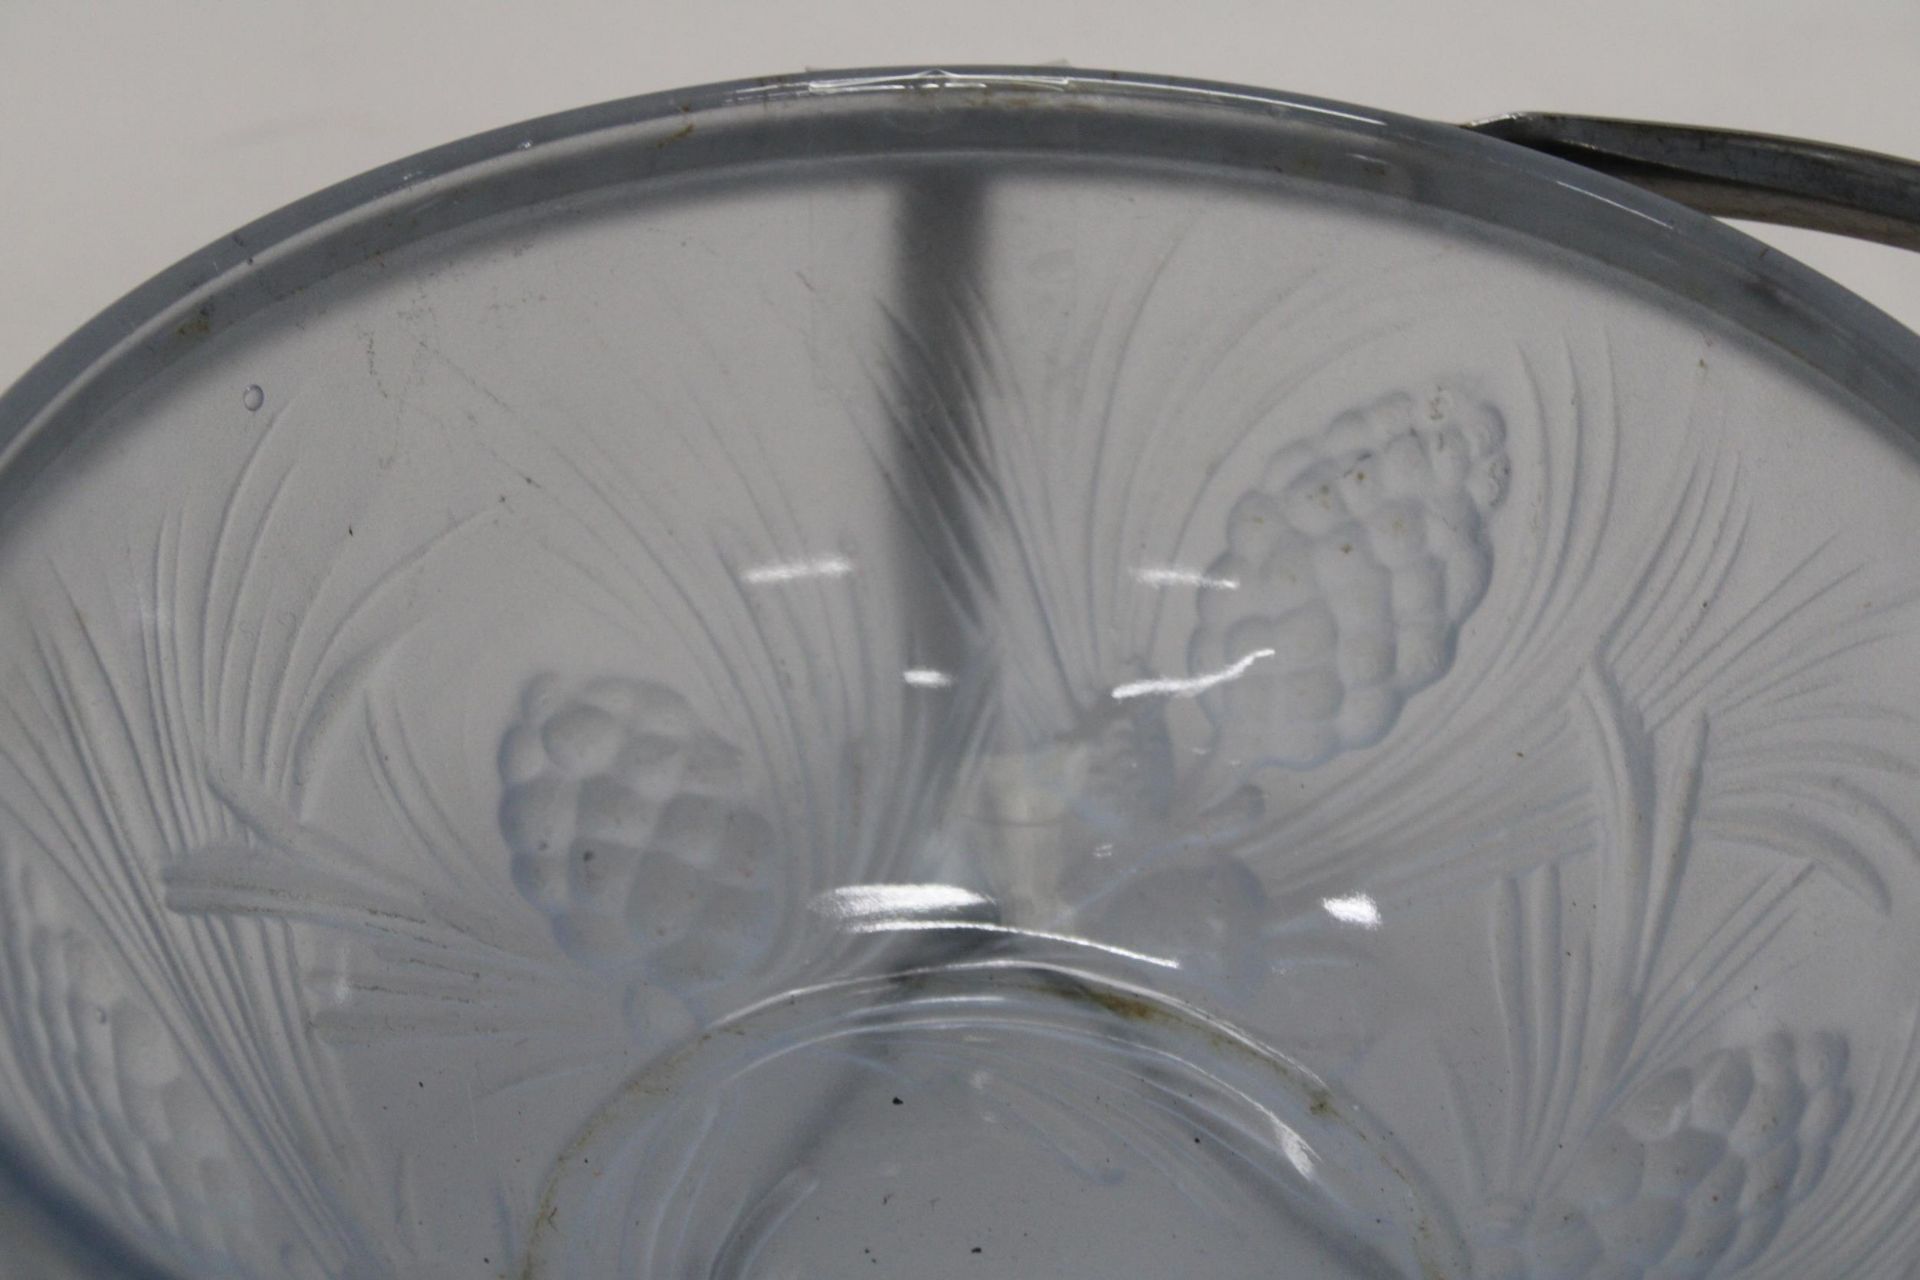 A VINTAGE JOBLING GLASS BOWL IN A SILVER PLATED HOLDER, DIAMETER 18CM - Image 6 of 6